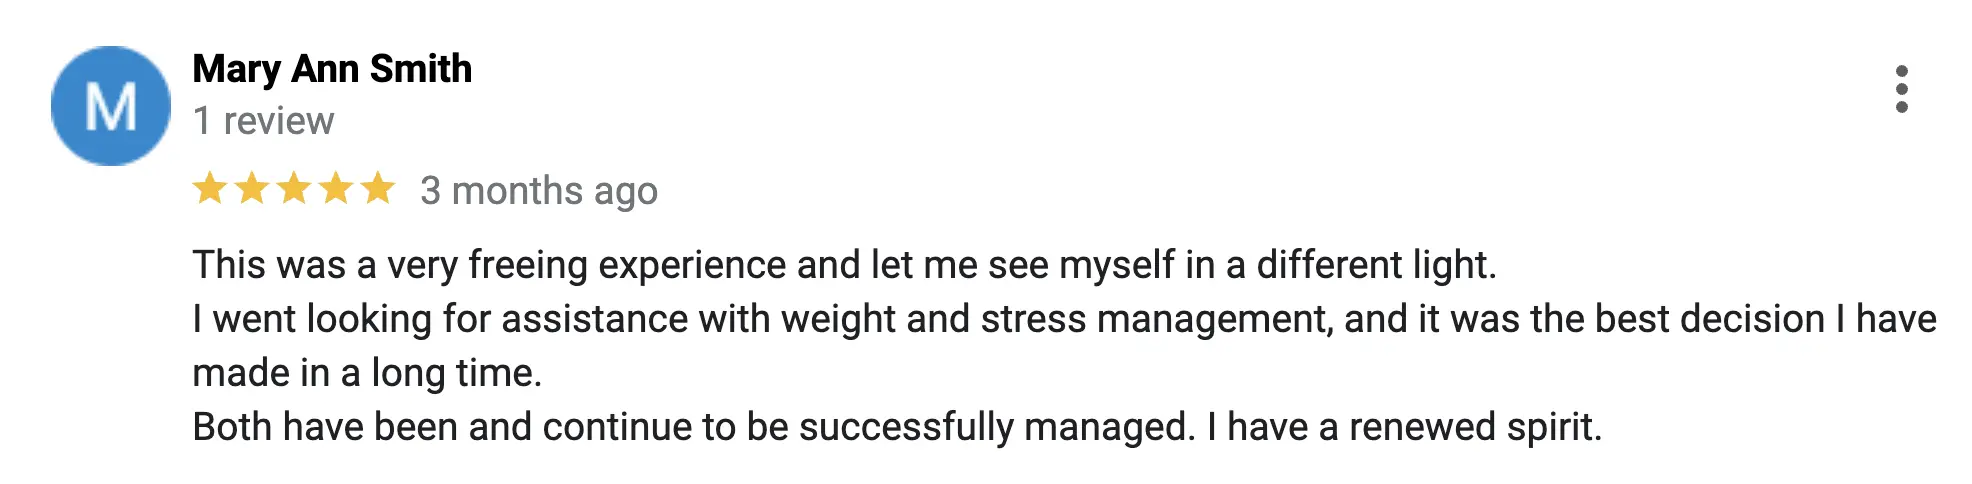 Customer review praising Sharon Jackman for weight and stress management